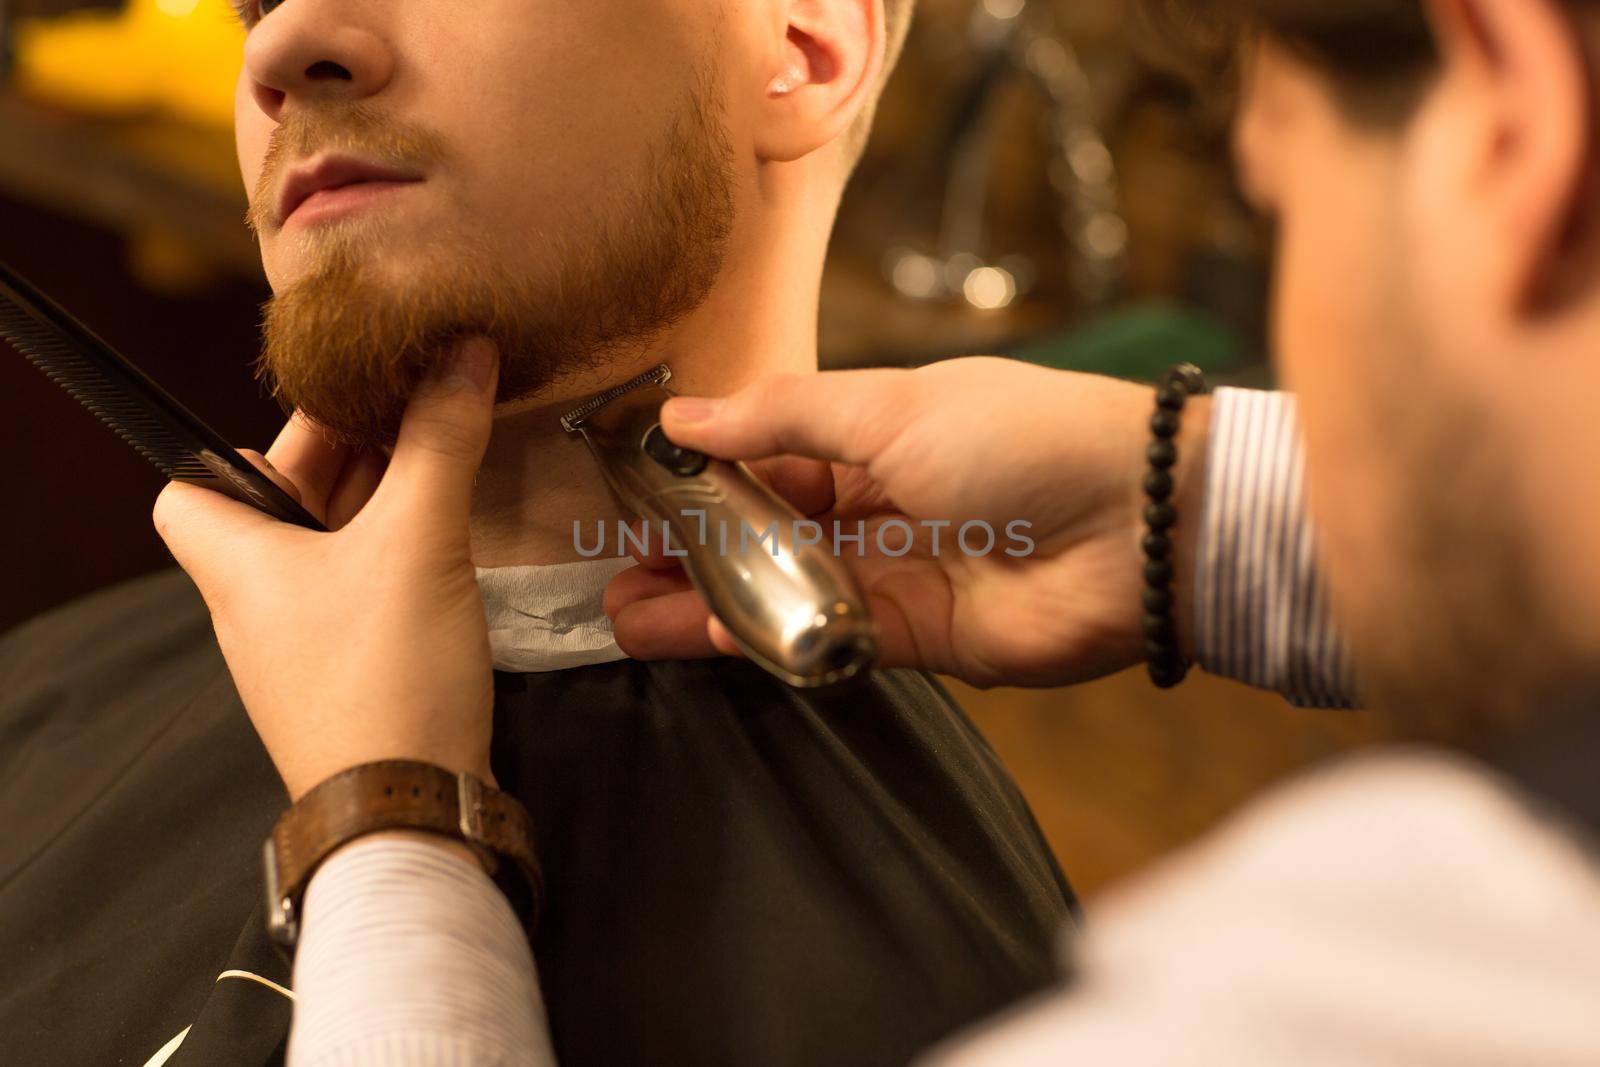 Cropped close up of a bearded man having his beard trimmed by a professional barber using trimmer clipper barbershop styling masculinity hipster service job customer client shaving barbering.